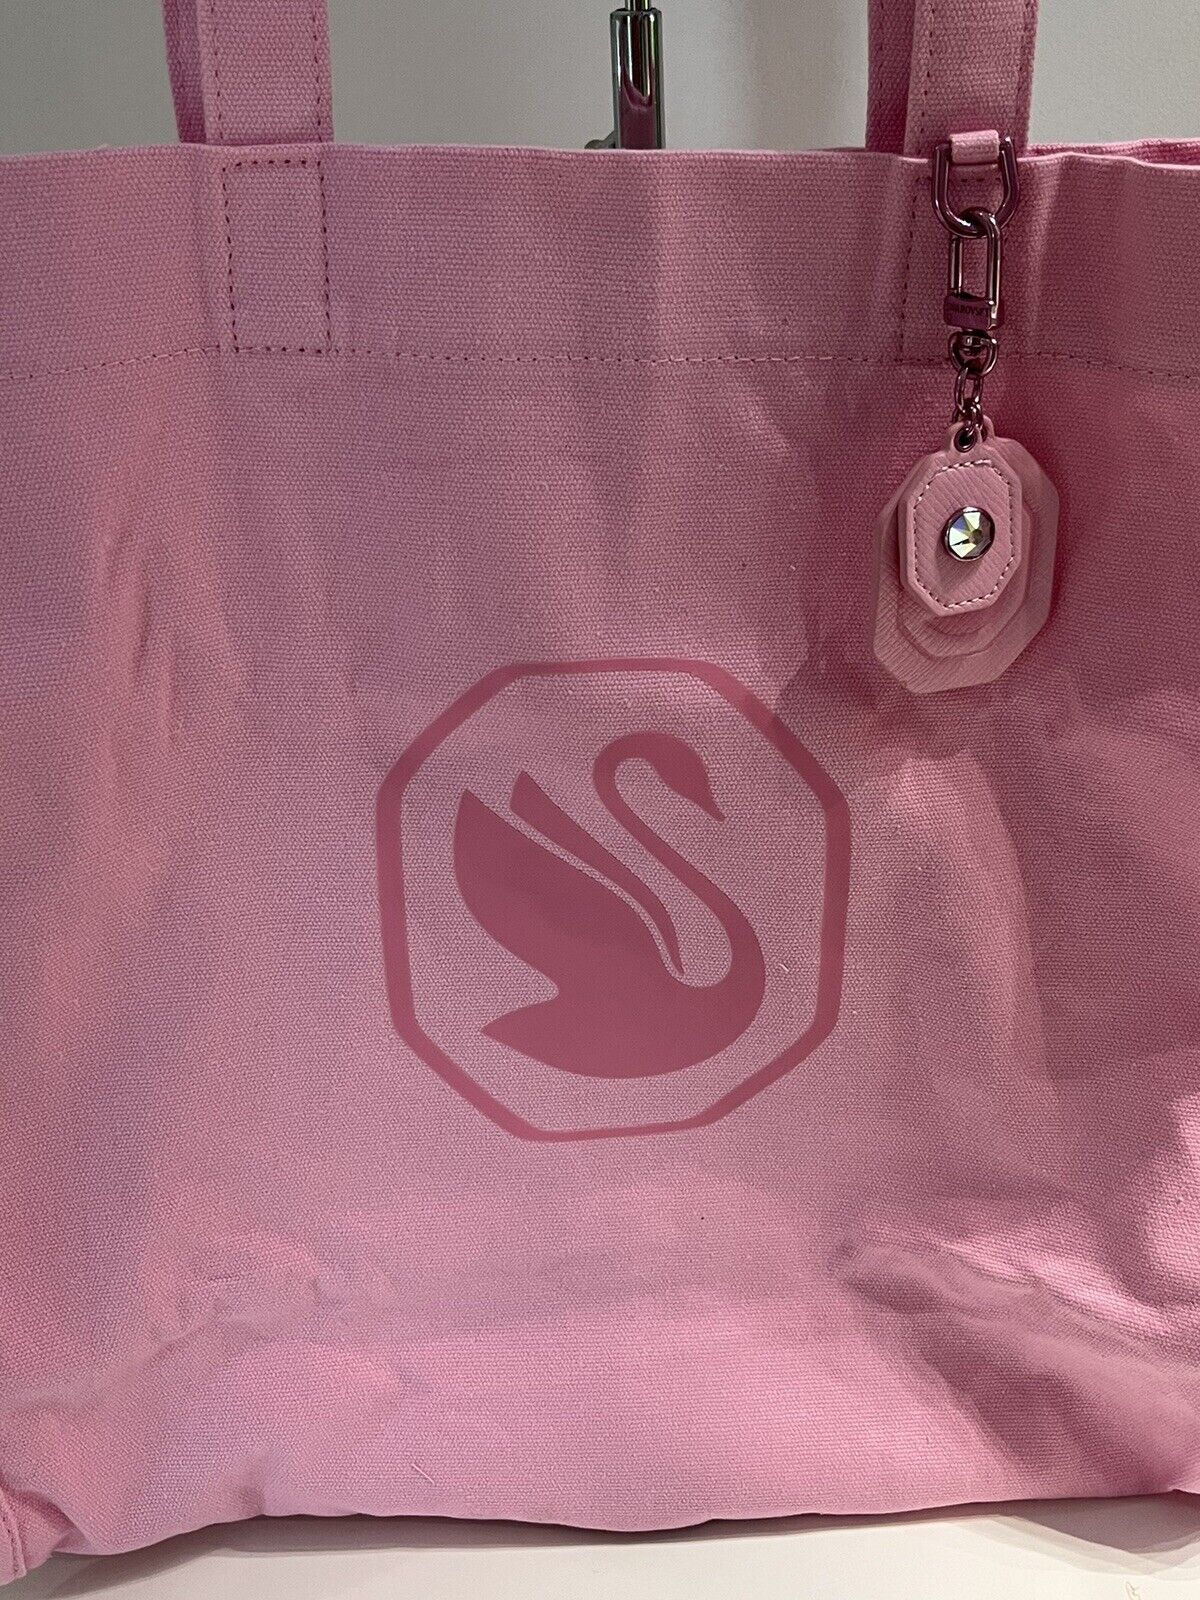 Swarovski  Iconic Swan Pink Canvas Tote Bag With Charm 5690047